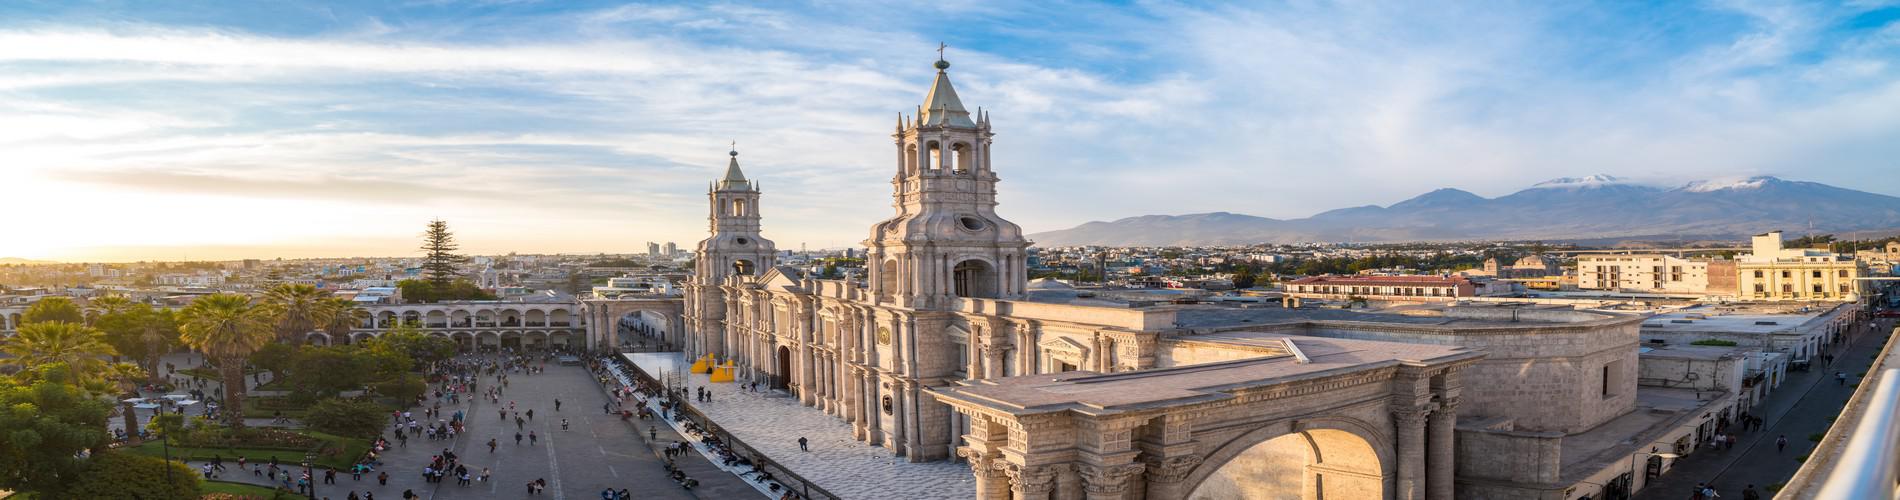 FAQS about Arequipa